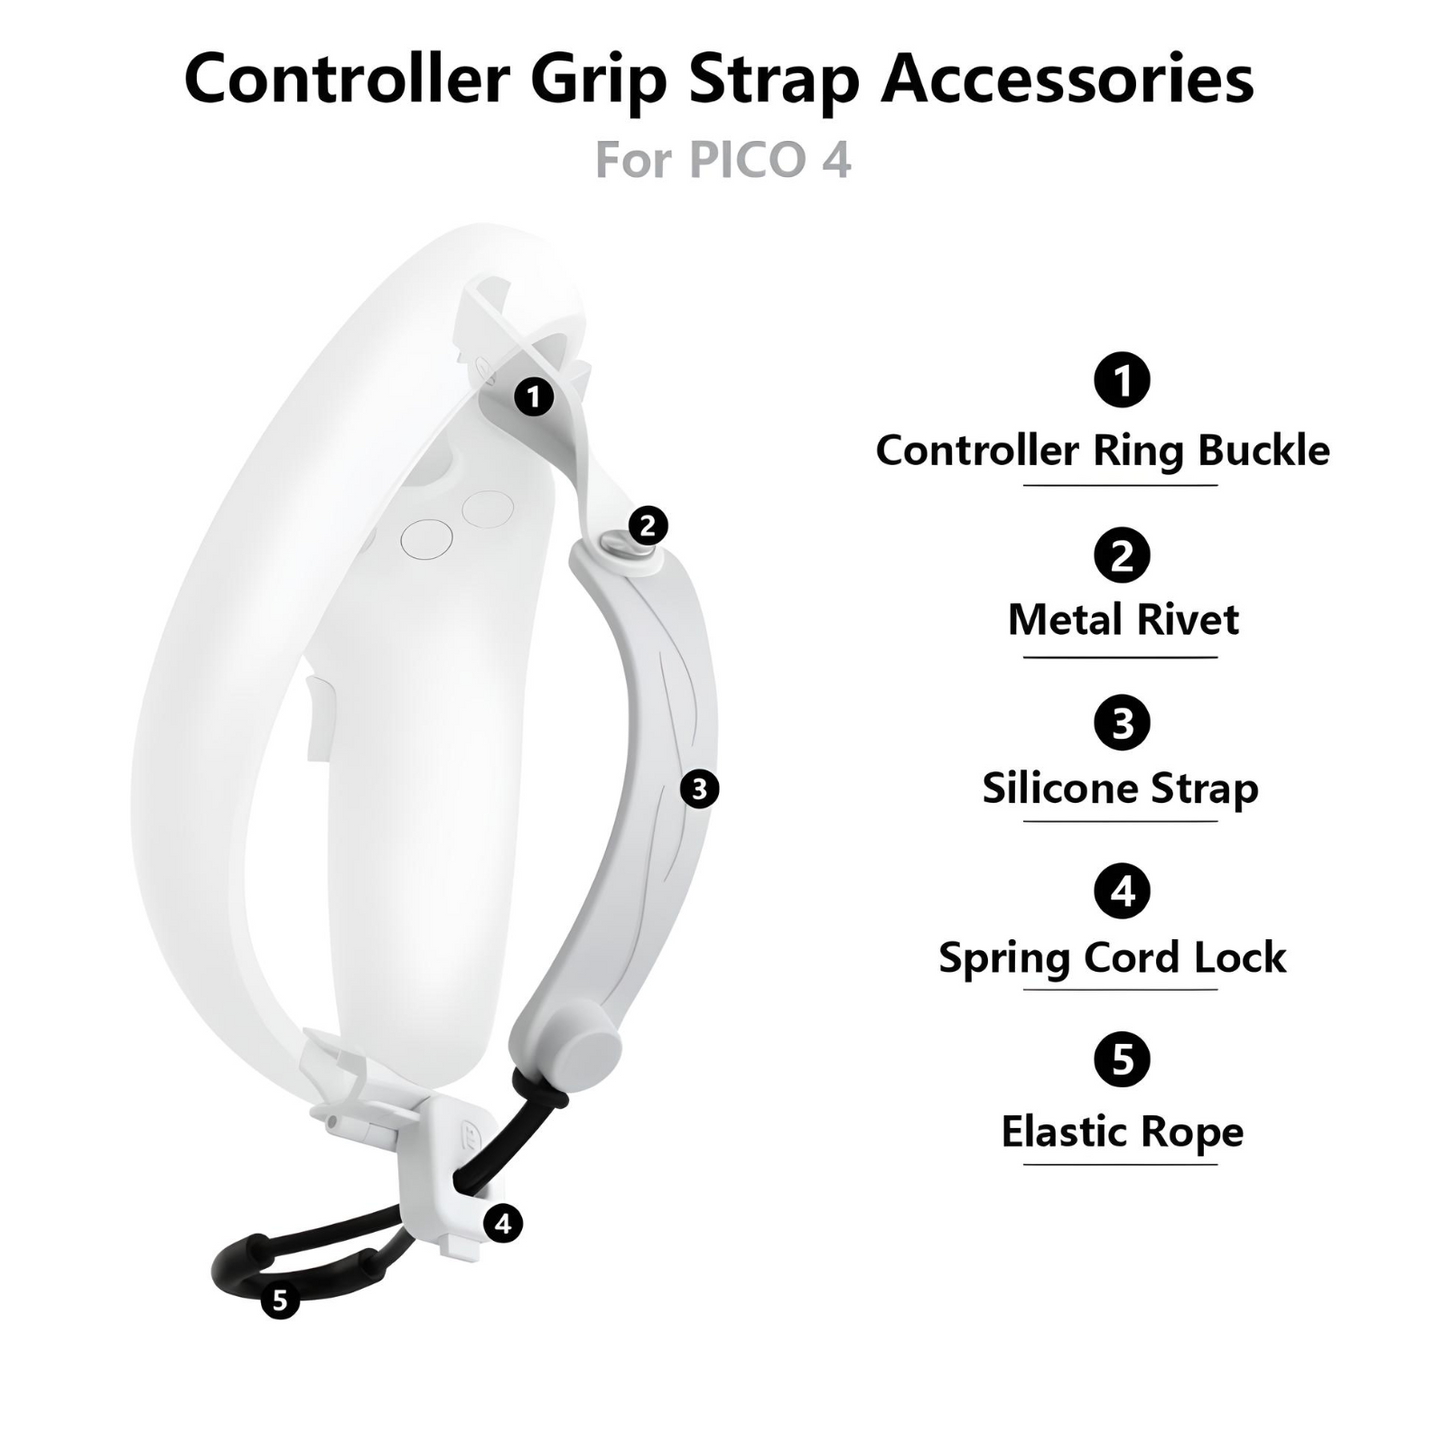 Adjustable Handle Grip Straps For PICO 4 Controllers